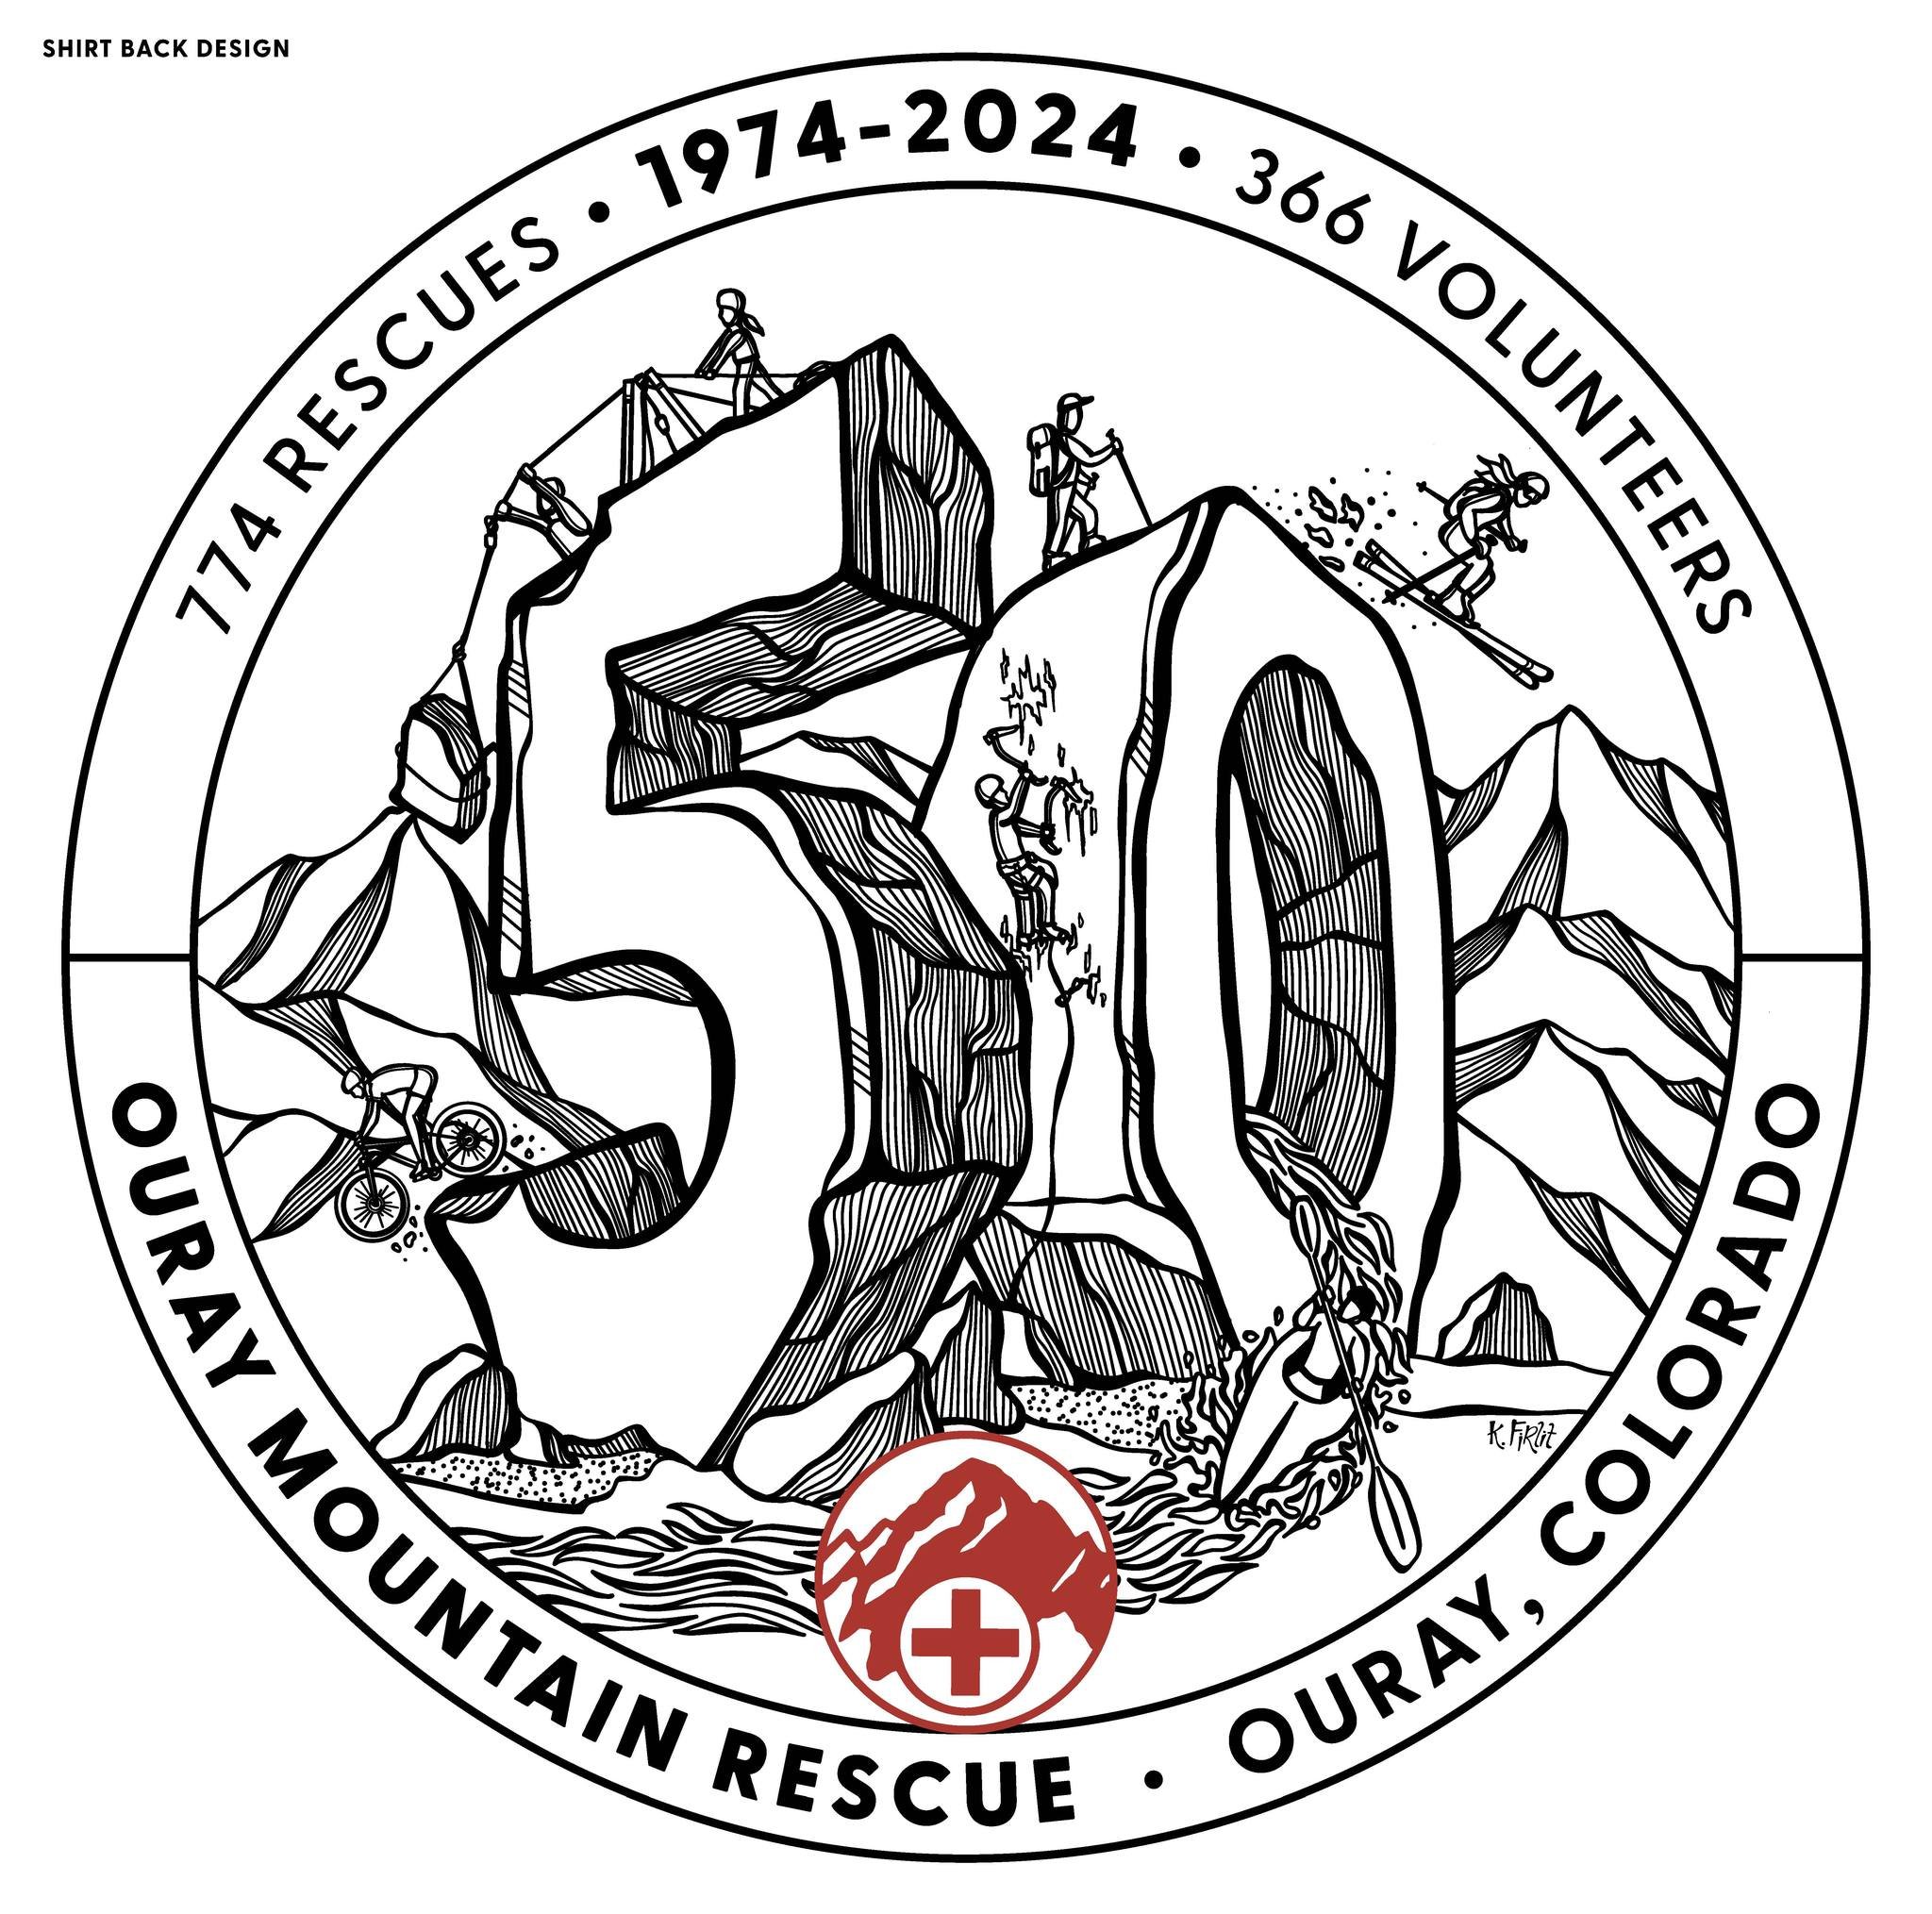 This summer we are celebrating our 50th year of service to Ouray County with multiple community events!

To kick things off, come join us at 6pm on Thursday, June 13th, at Fellin Park in Ouray, when some of our active rescue team members will perform